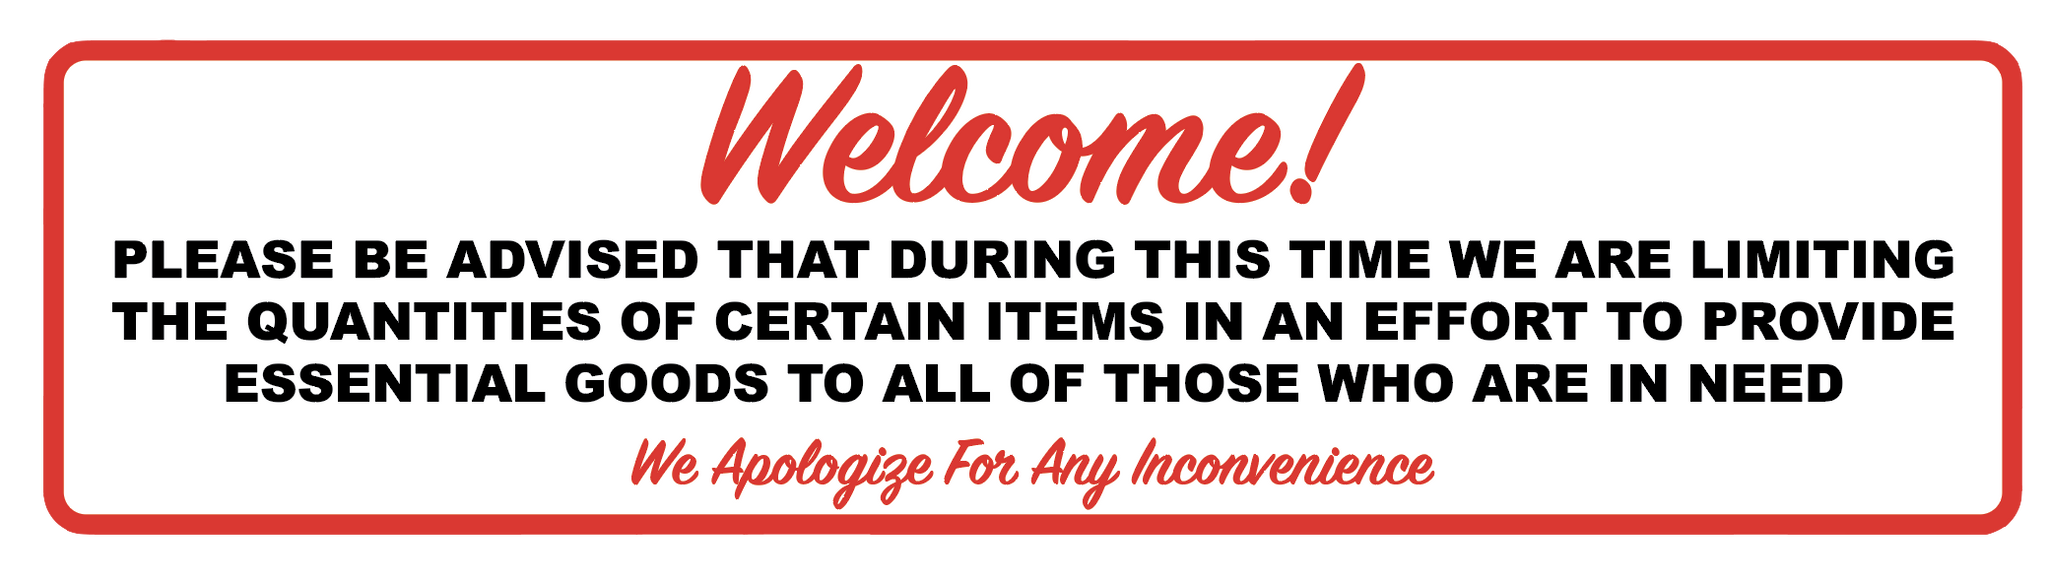 "Welcome: Limiting Quantities of Essential Goods" Adhesive Durable Vinyl Decal- 6x24"